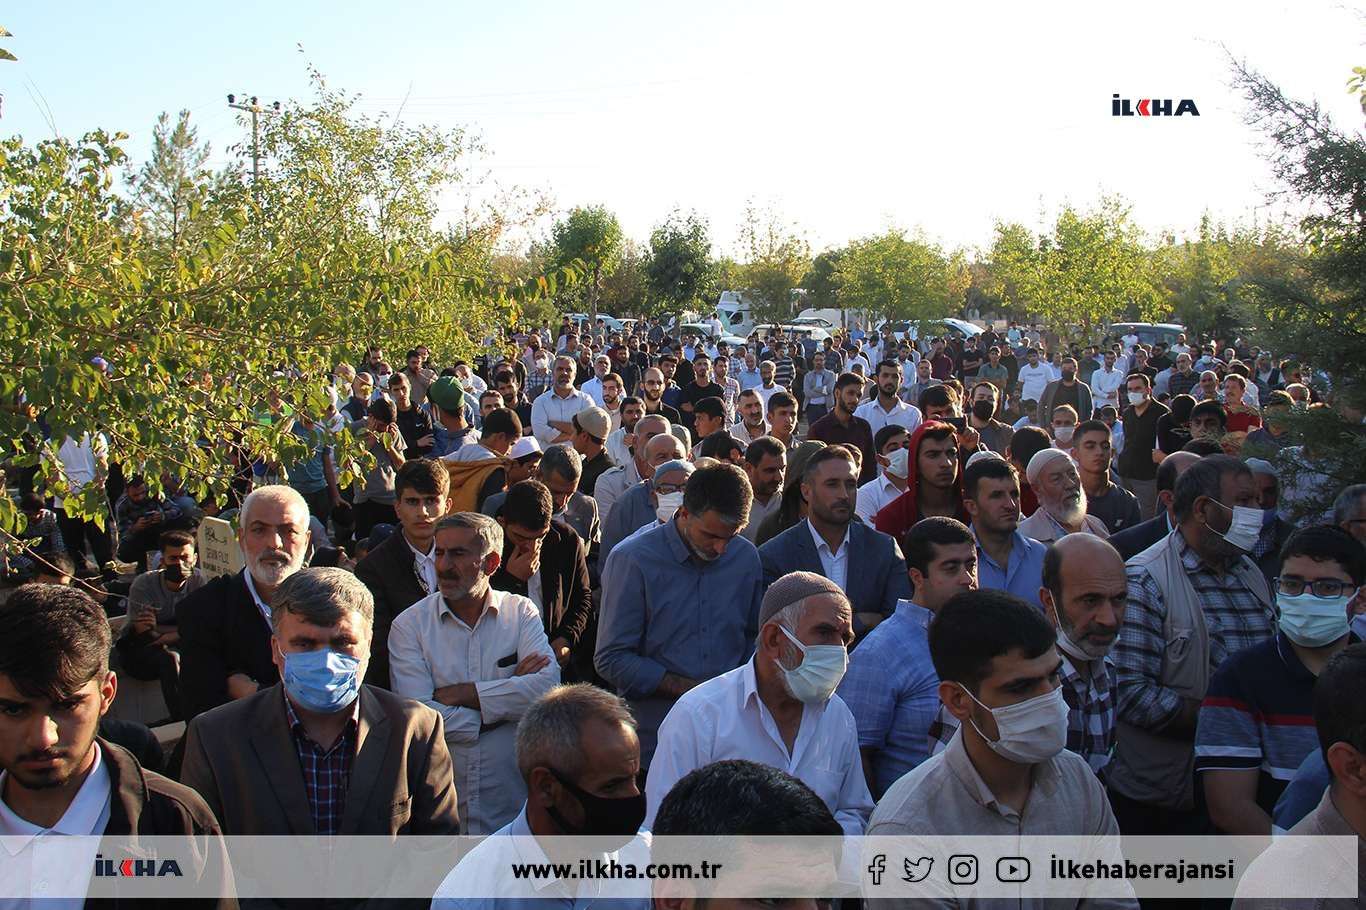 Martyrs of October 6-8 massacre commemorated at the site of their grave